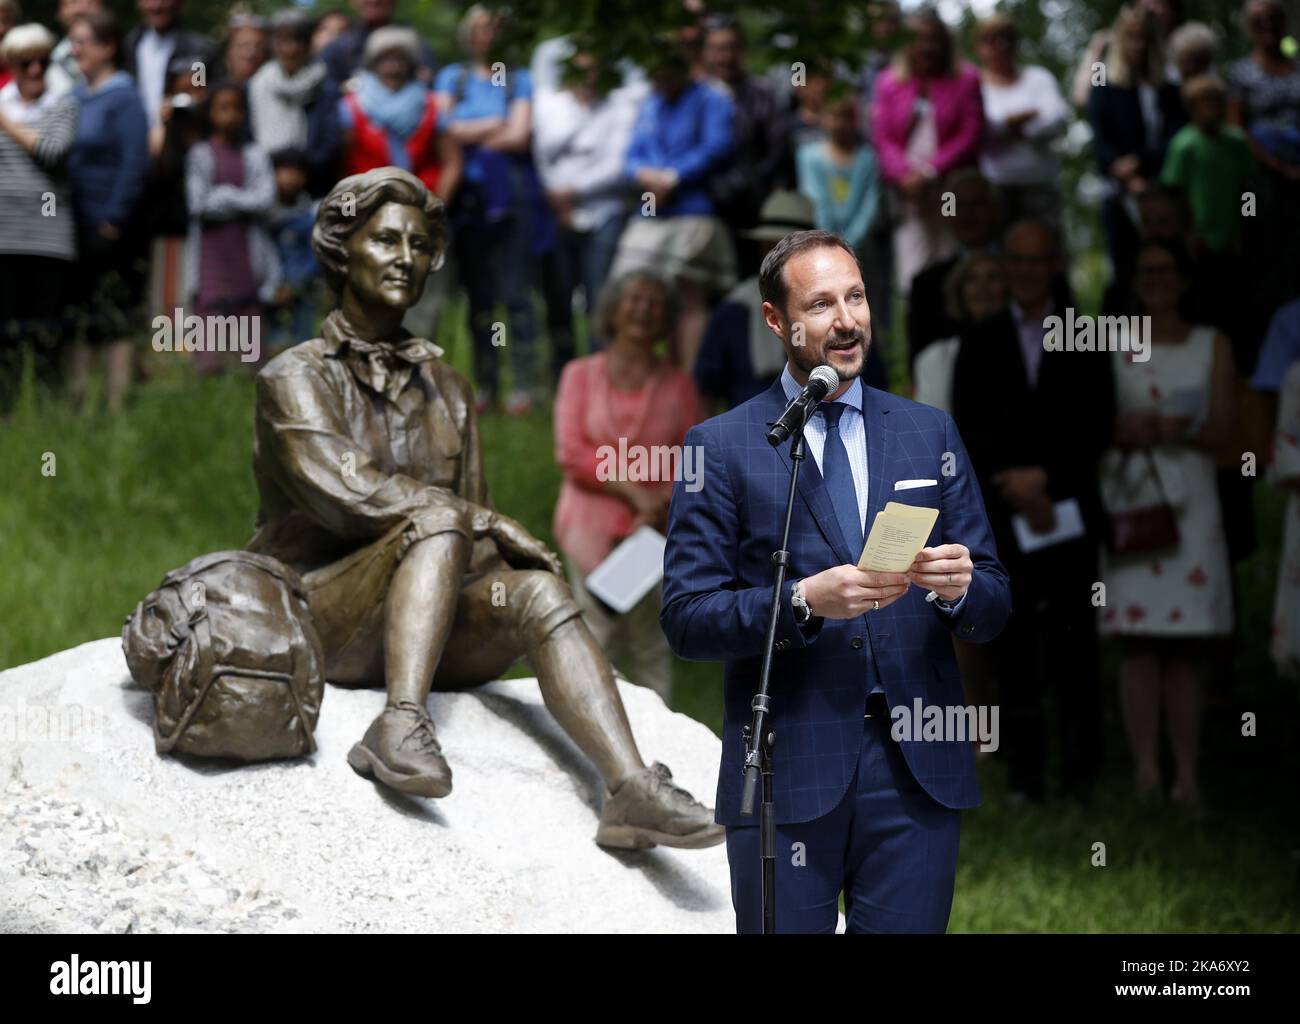 Oslo, Norway 20170704. Crown Prince Haakon with The Norwegian Trekking Association's ( DNT's) gift to Queen Sonja in Queen Park in connection with Queen Sonja's eightieth birthday. The artist Kirsten Kokkin has made the bronze sculpture that was uncovered by the grandchildren. Queen Sonja Art Stablel opens in the Palaces old stable buildings on the Queen's 80th birthday. Photo: Lise Aaserud / NTB scanpix [LANUAGESEPARATOR] Oslo 20170704. Kronprins Haakon ved DNTs gave til dronning Sonja. Kong Harald, dronning Sonja, kronprinsesse Mette-Marit, prins Sverre Magnus, Leah Isadora Behn, Maud Angel Stock Photo